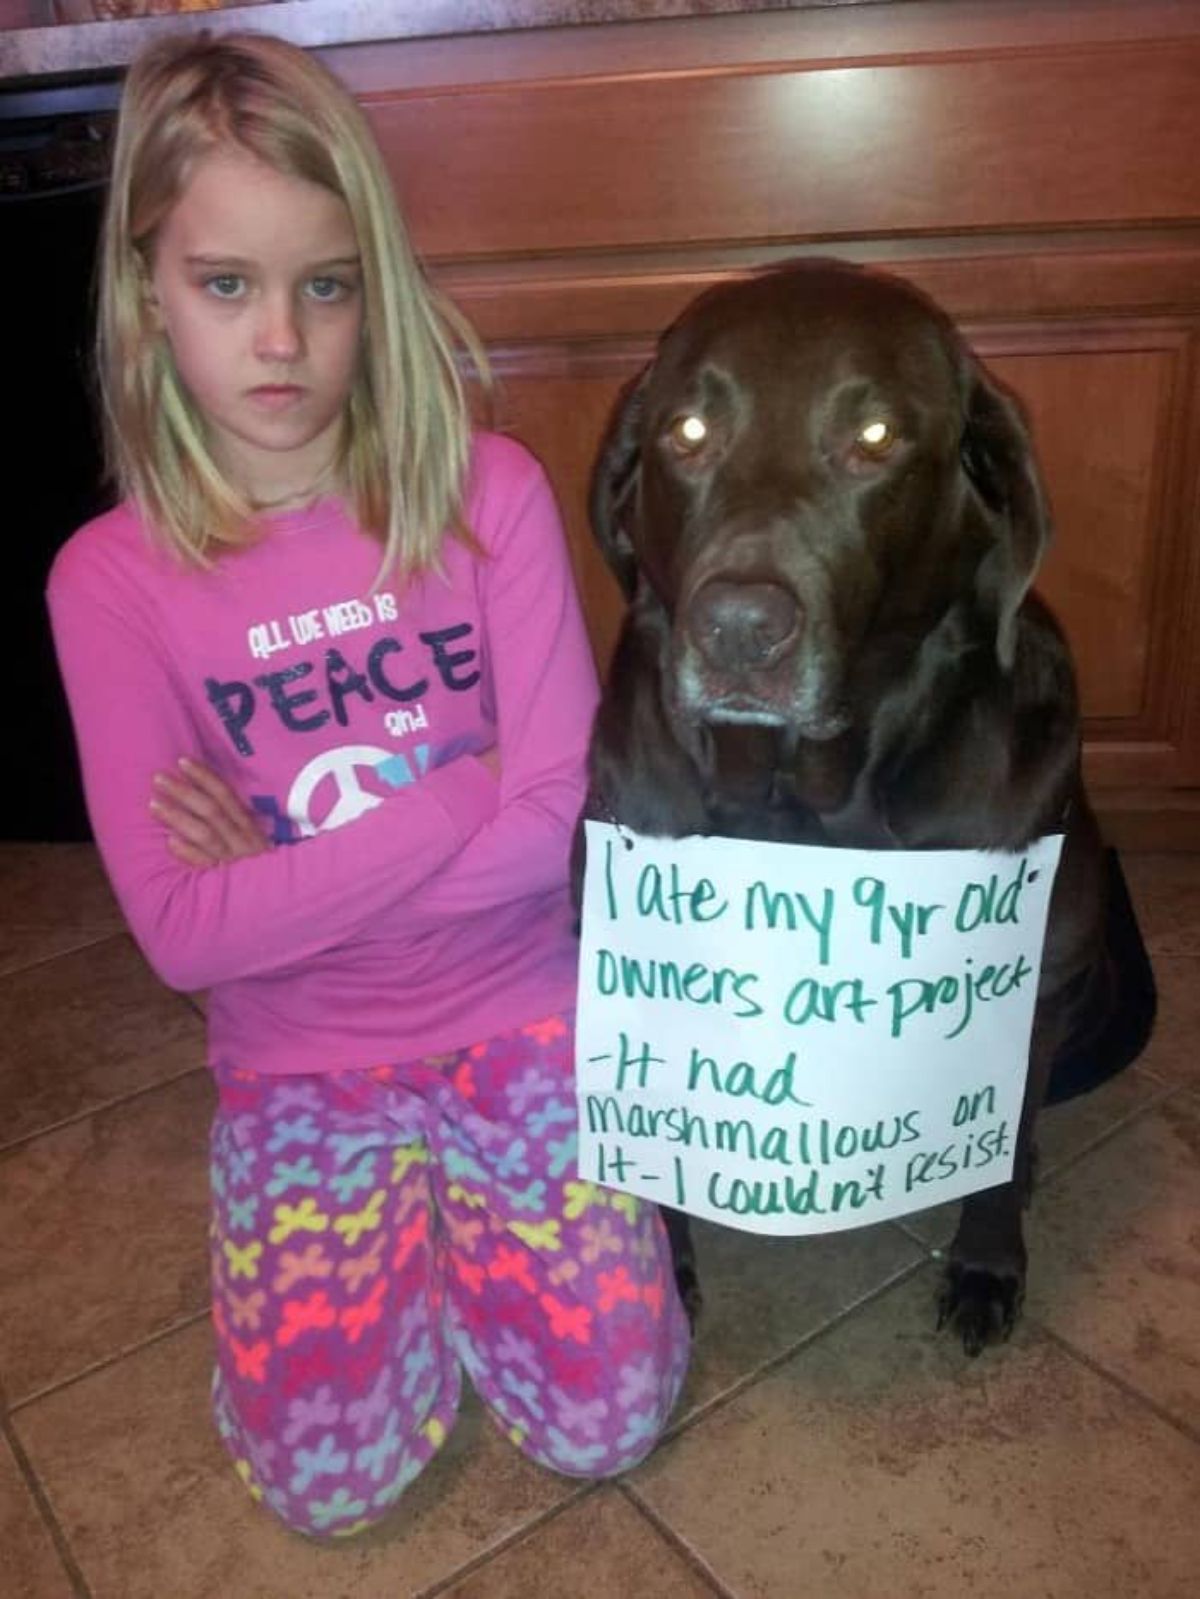 angry little girl kneeling by a black dog with a note around the neck saying I ate my 9 yr old owners art project- it had marshmallows on it- I couldn't resist